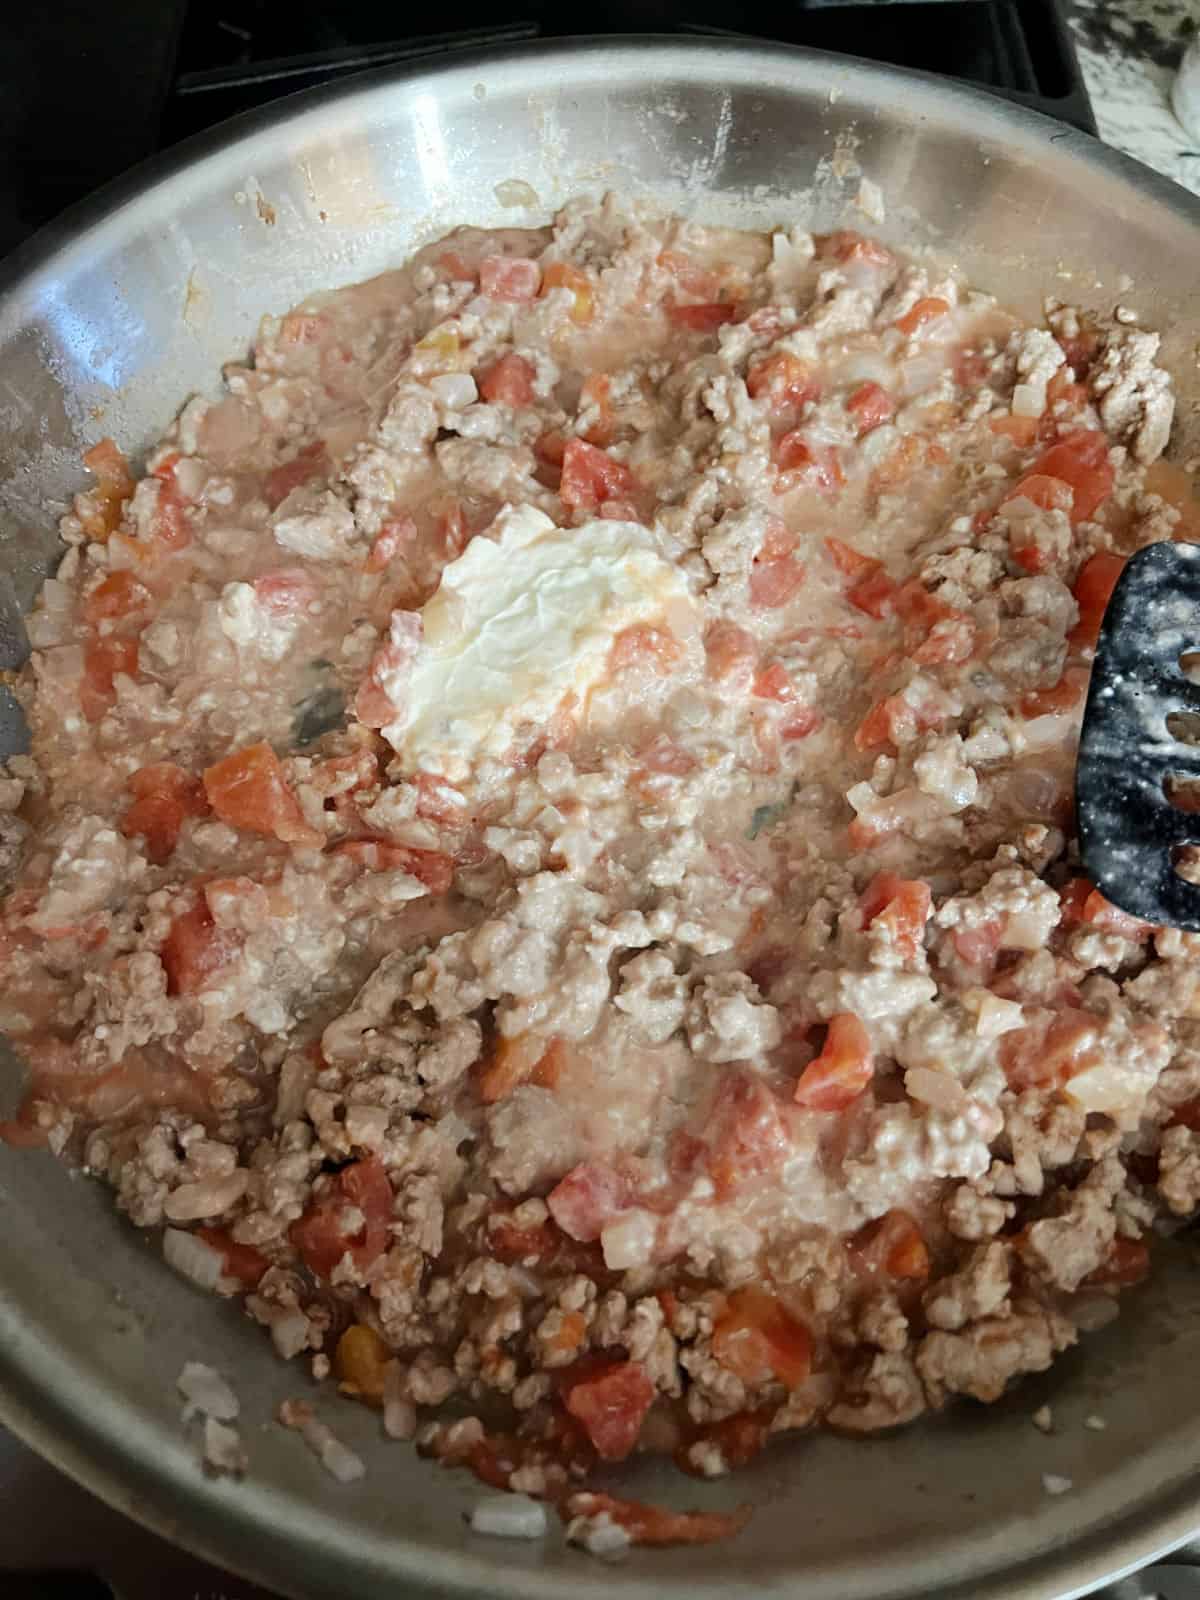 cream cheese melting in the skillet of cooked turkey and diced tomato mixture.